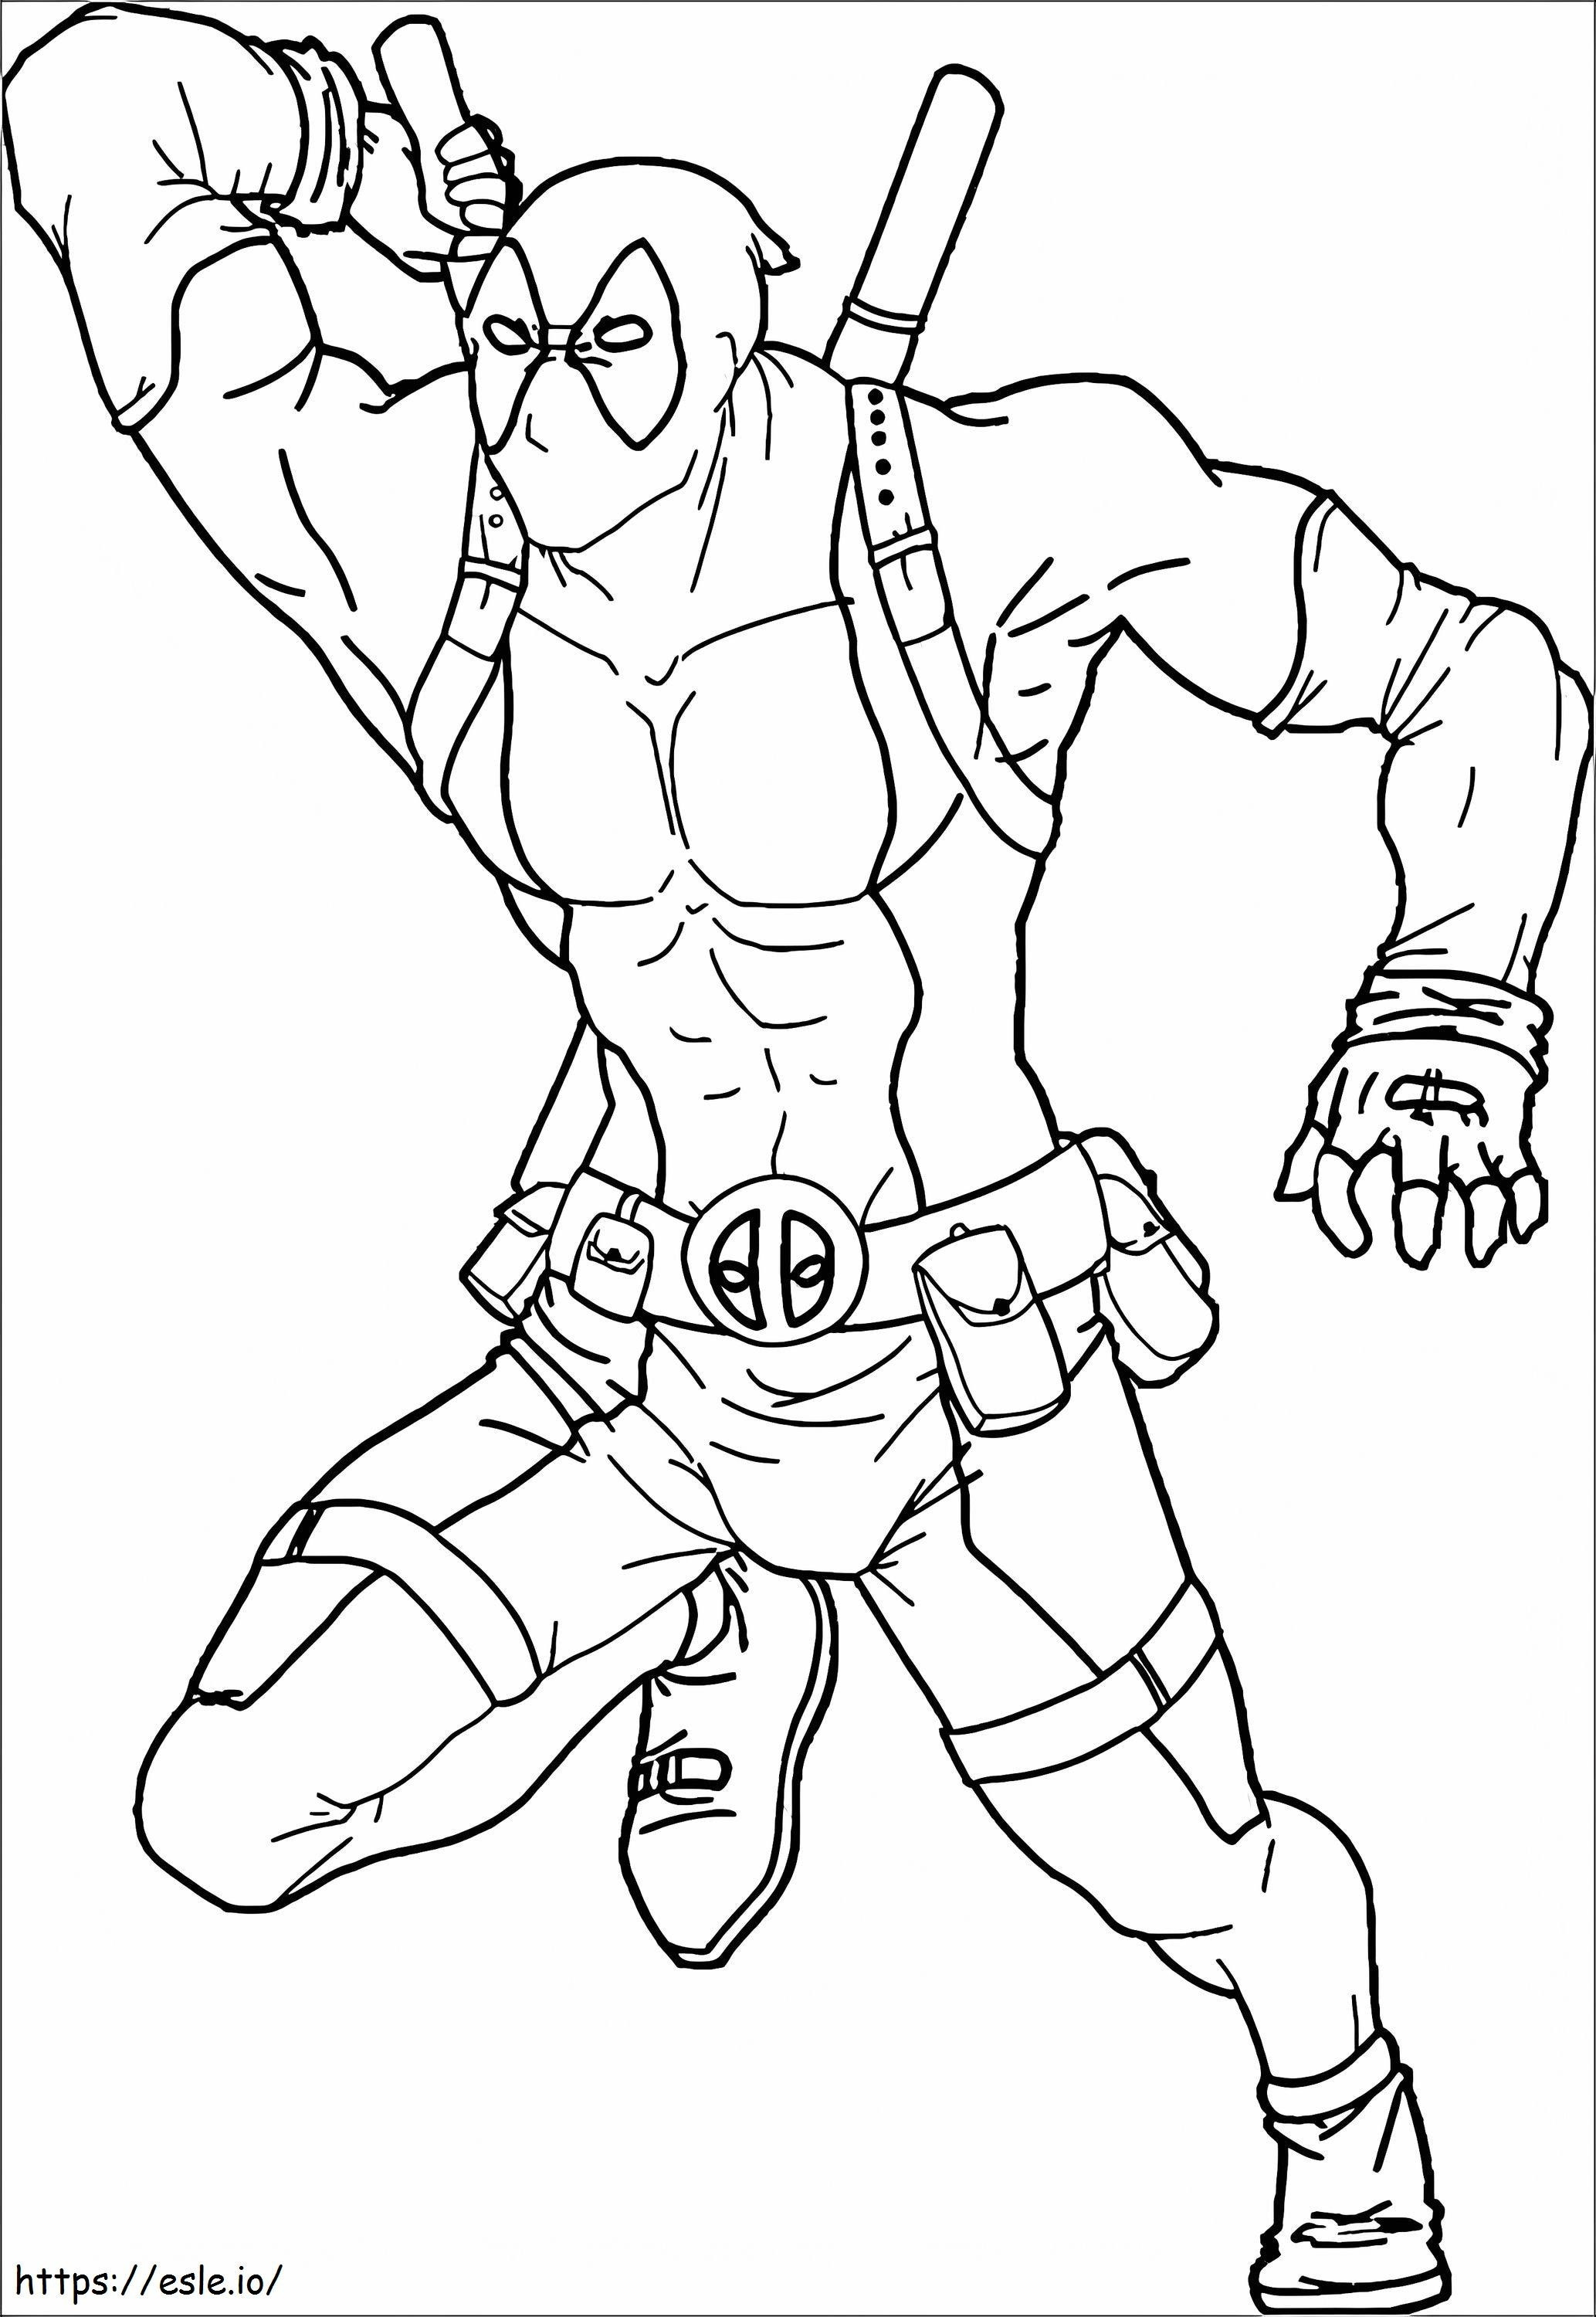 Deadpool Attacker coloring page